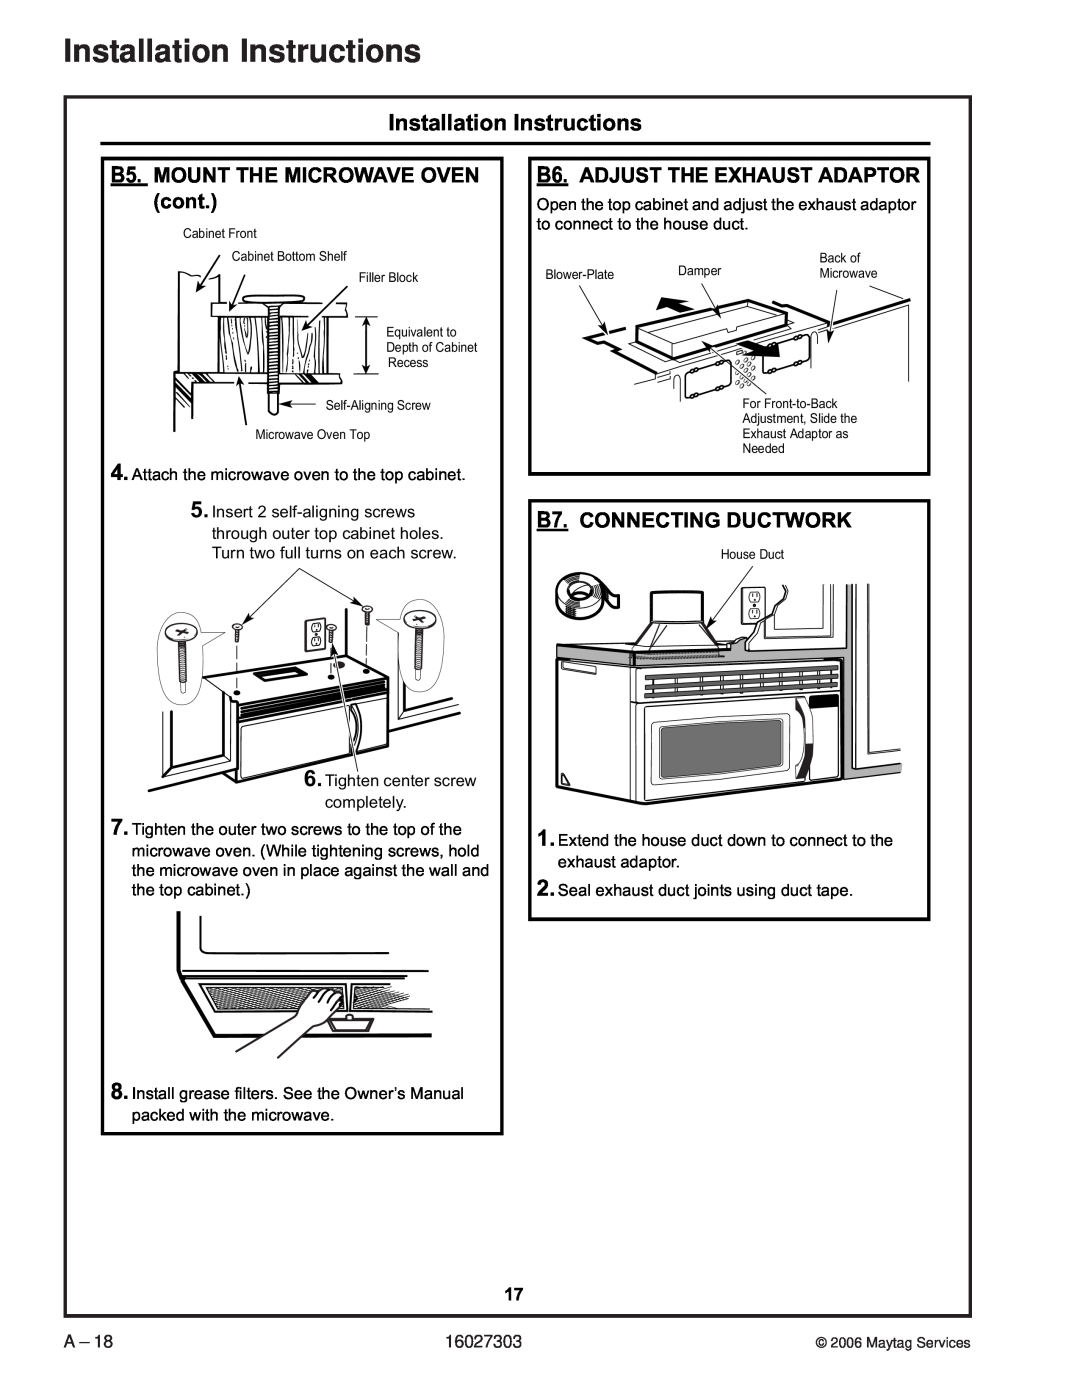 Maytag UMV1152CA manual B5.MOUNT THE MICROWAVE OVEN cont, B6.ADJUST THE EXHAUST ADAPTOR, B7.CONNECTING DUCTWORK 